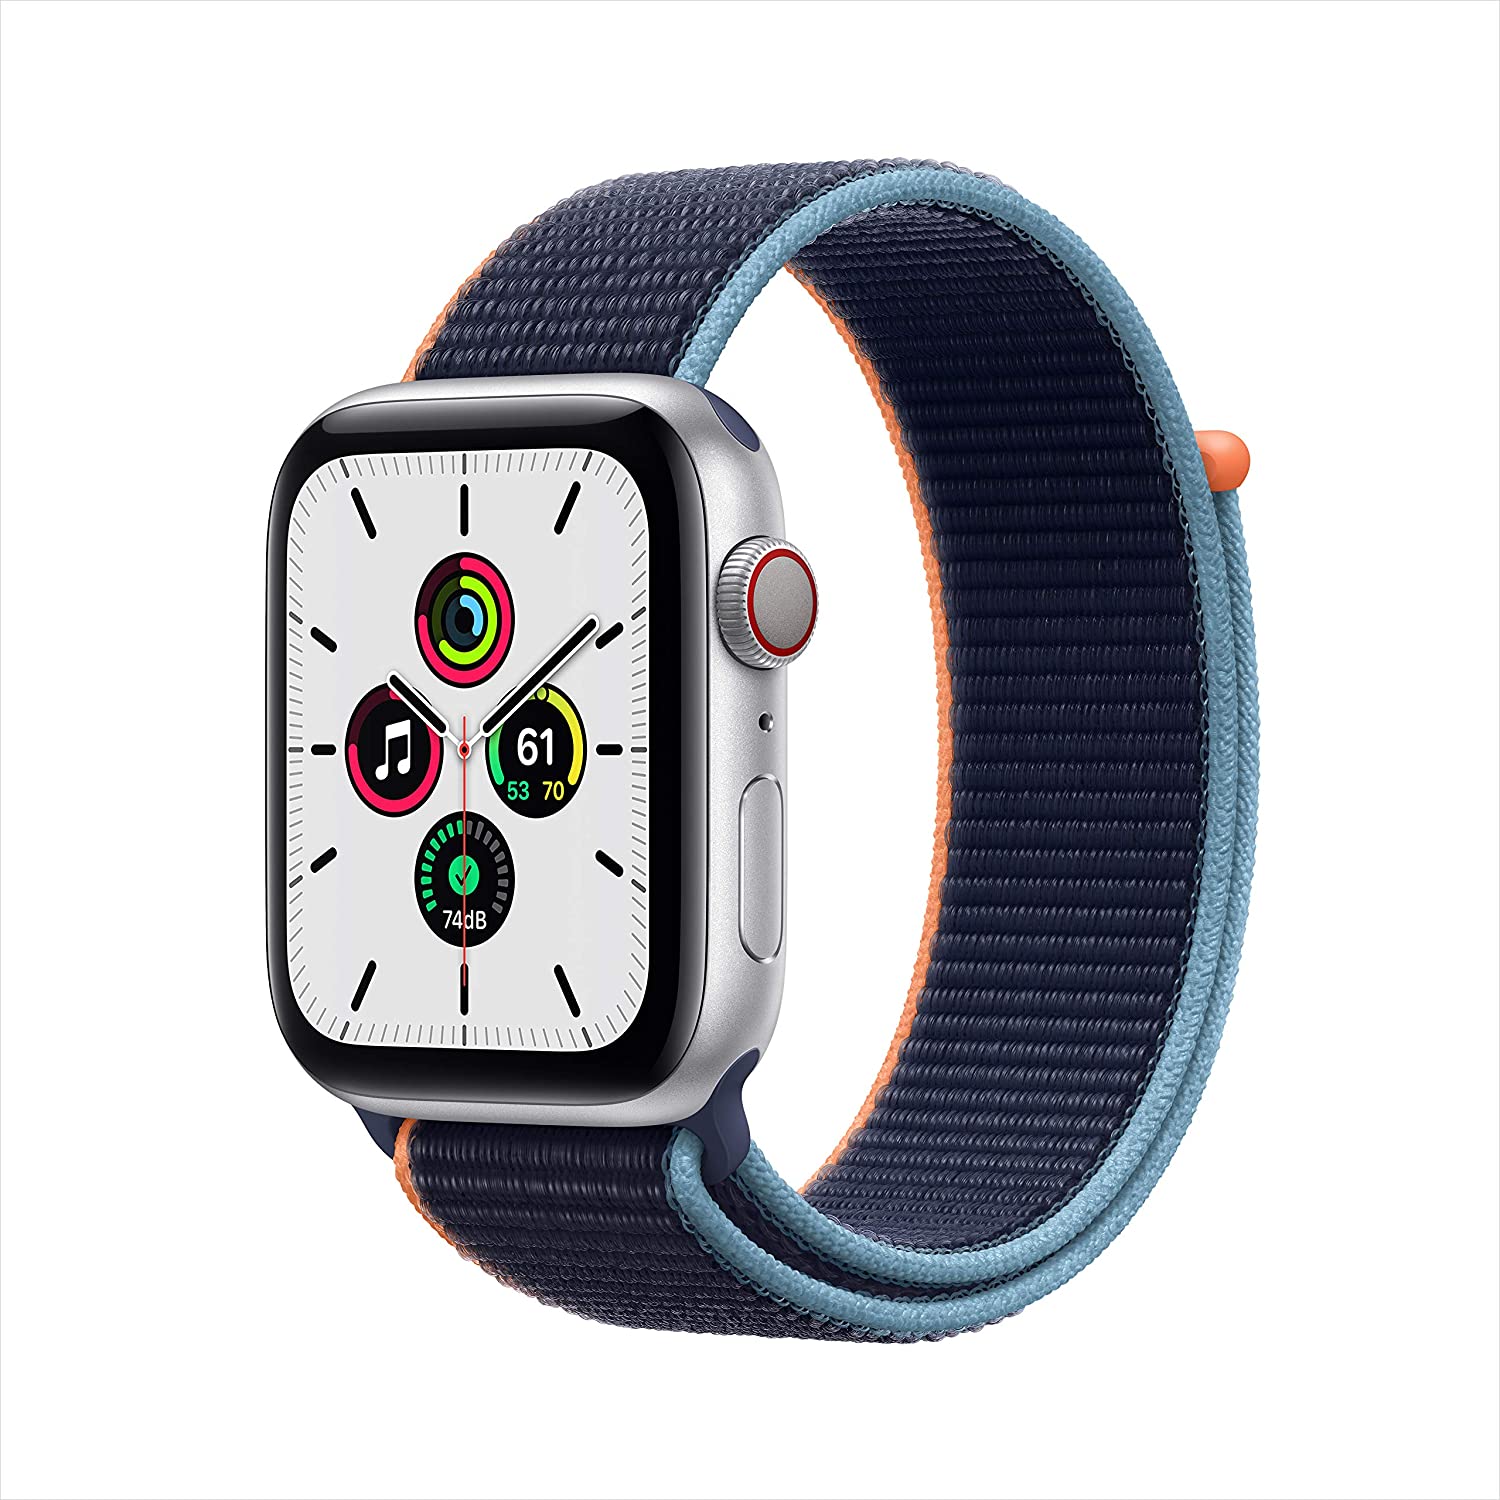 Apple Watch SE (44mm) (Cellular) Specifications